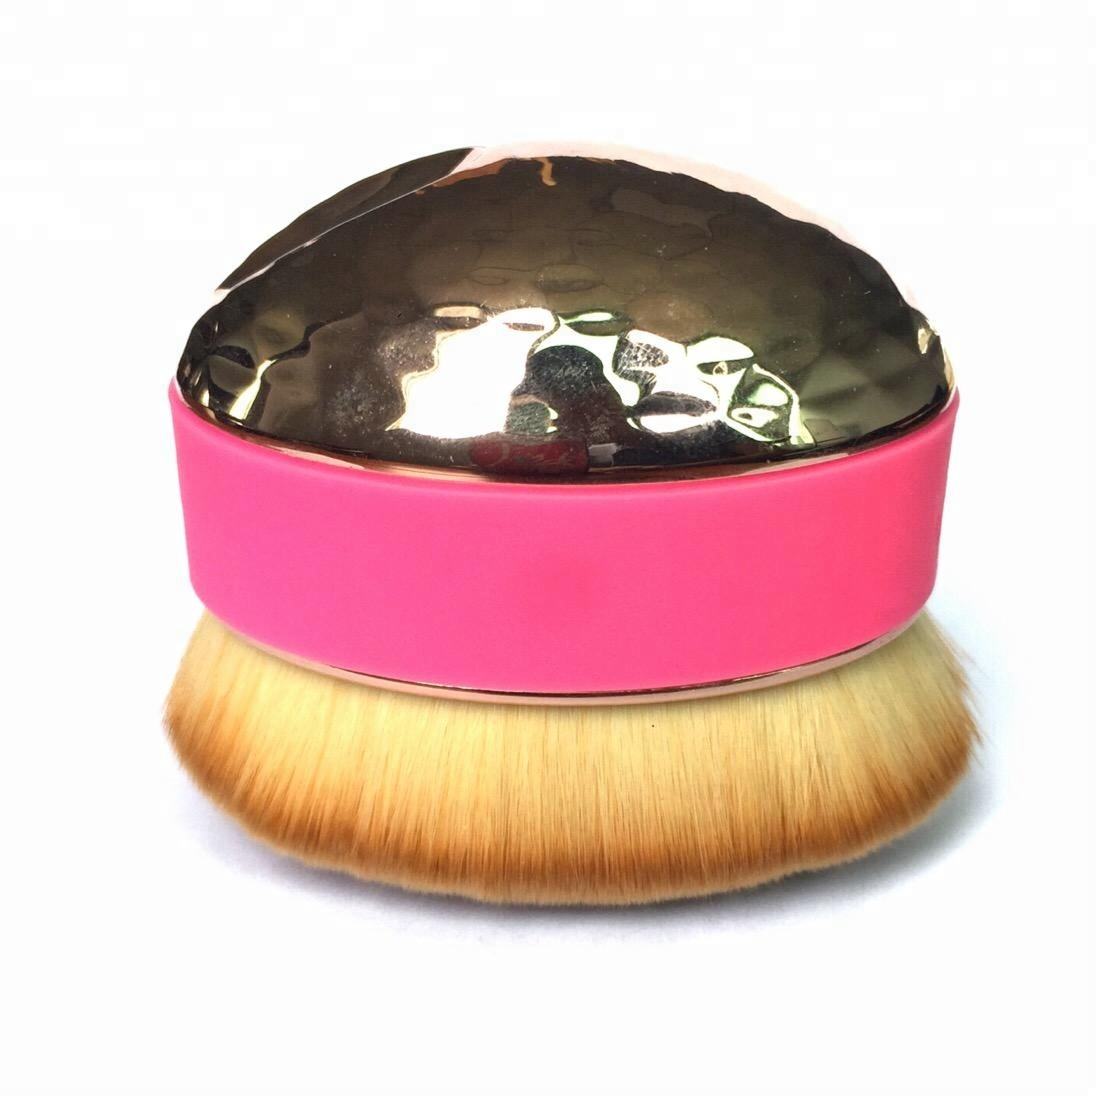 High dense self tanning body brushes to apply tanning lotion